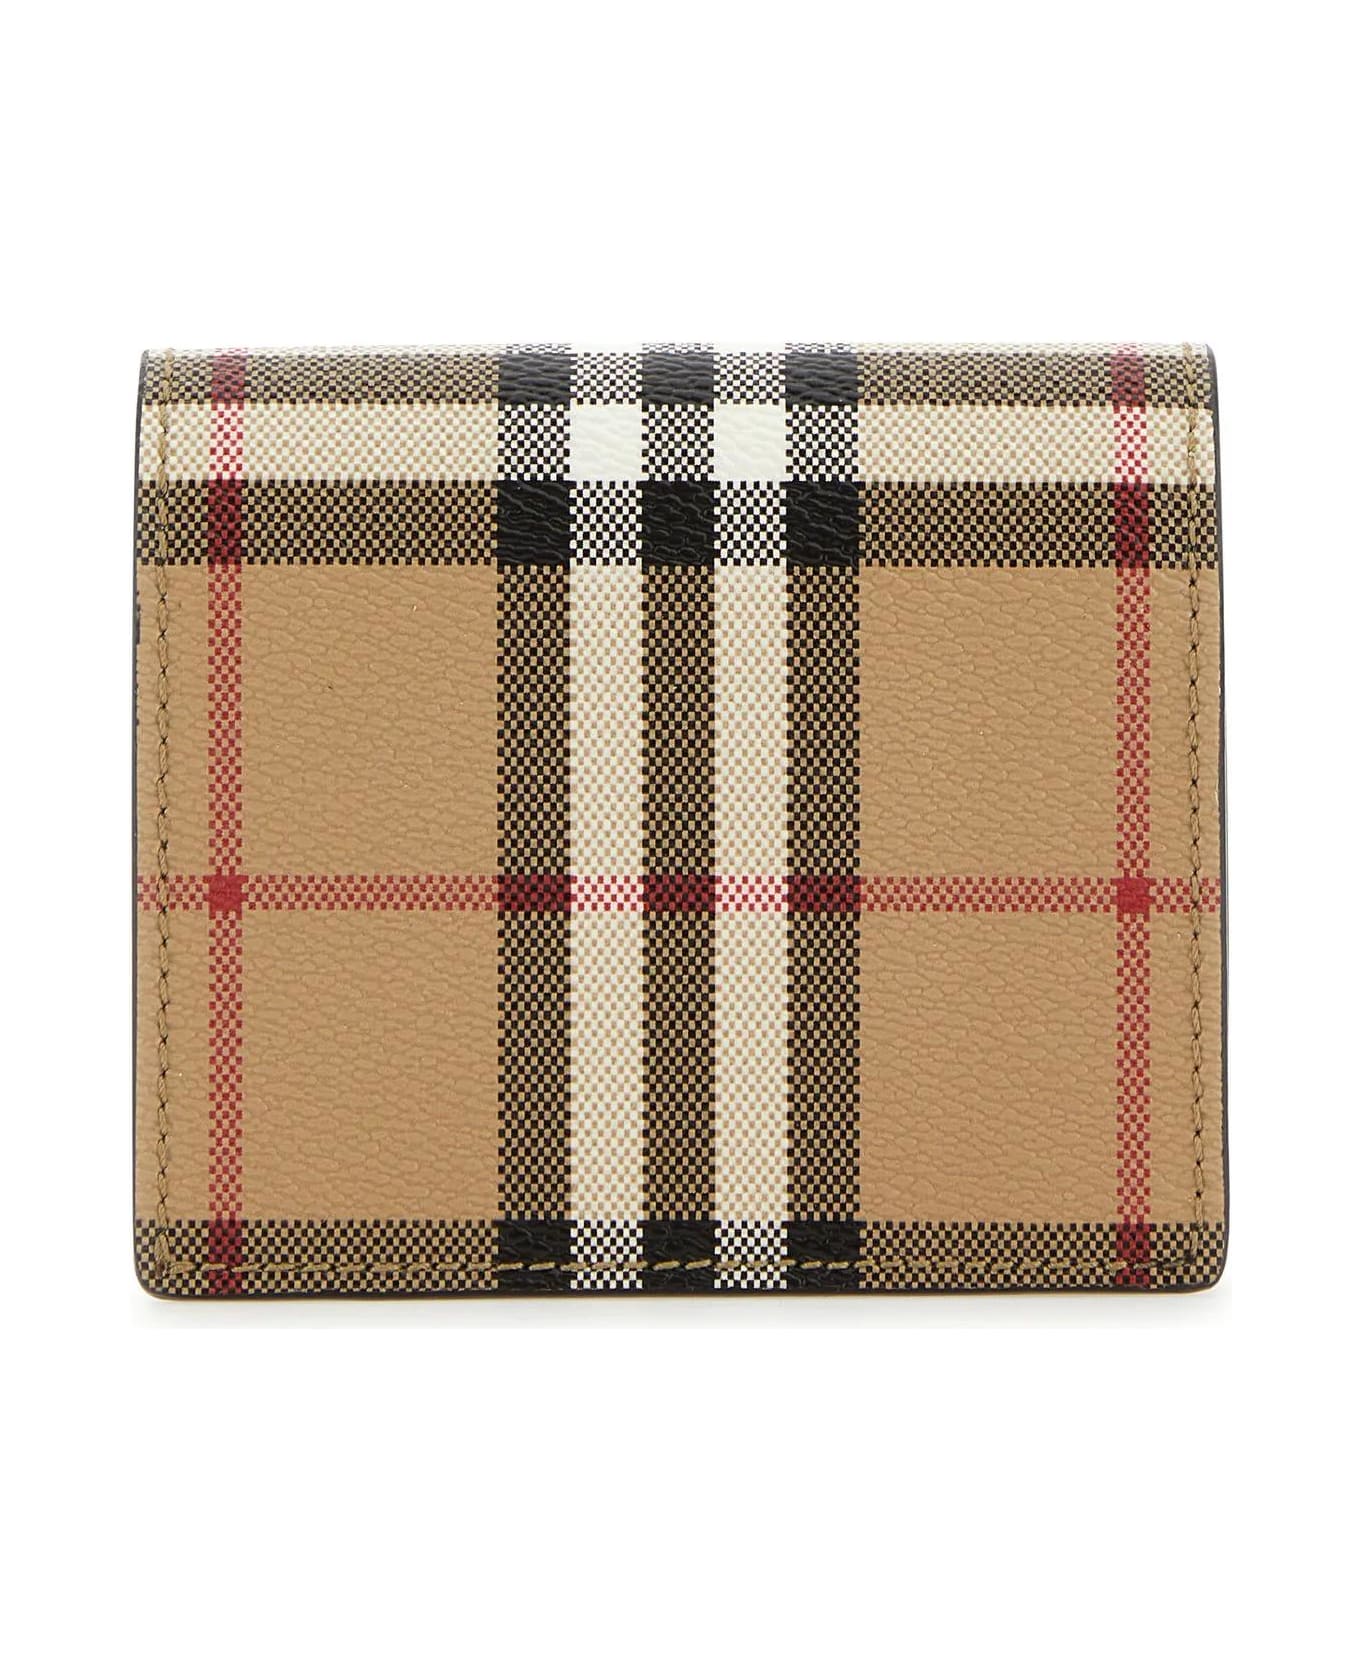 Burberry Printed Canvas Small Wallet - Beige 財布